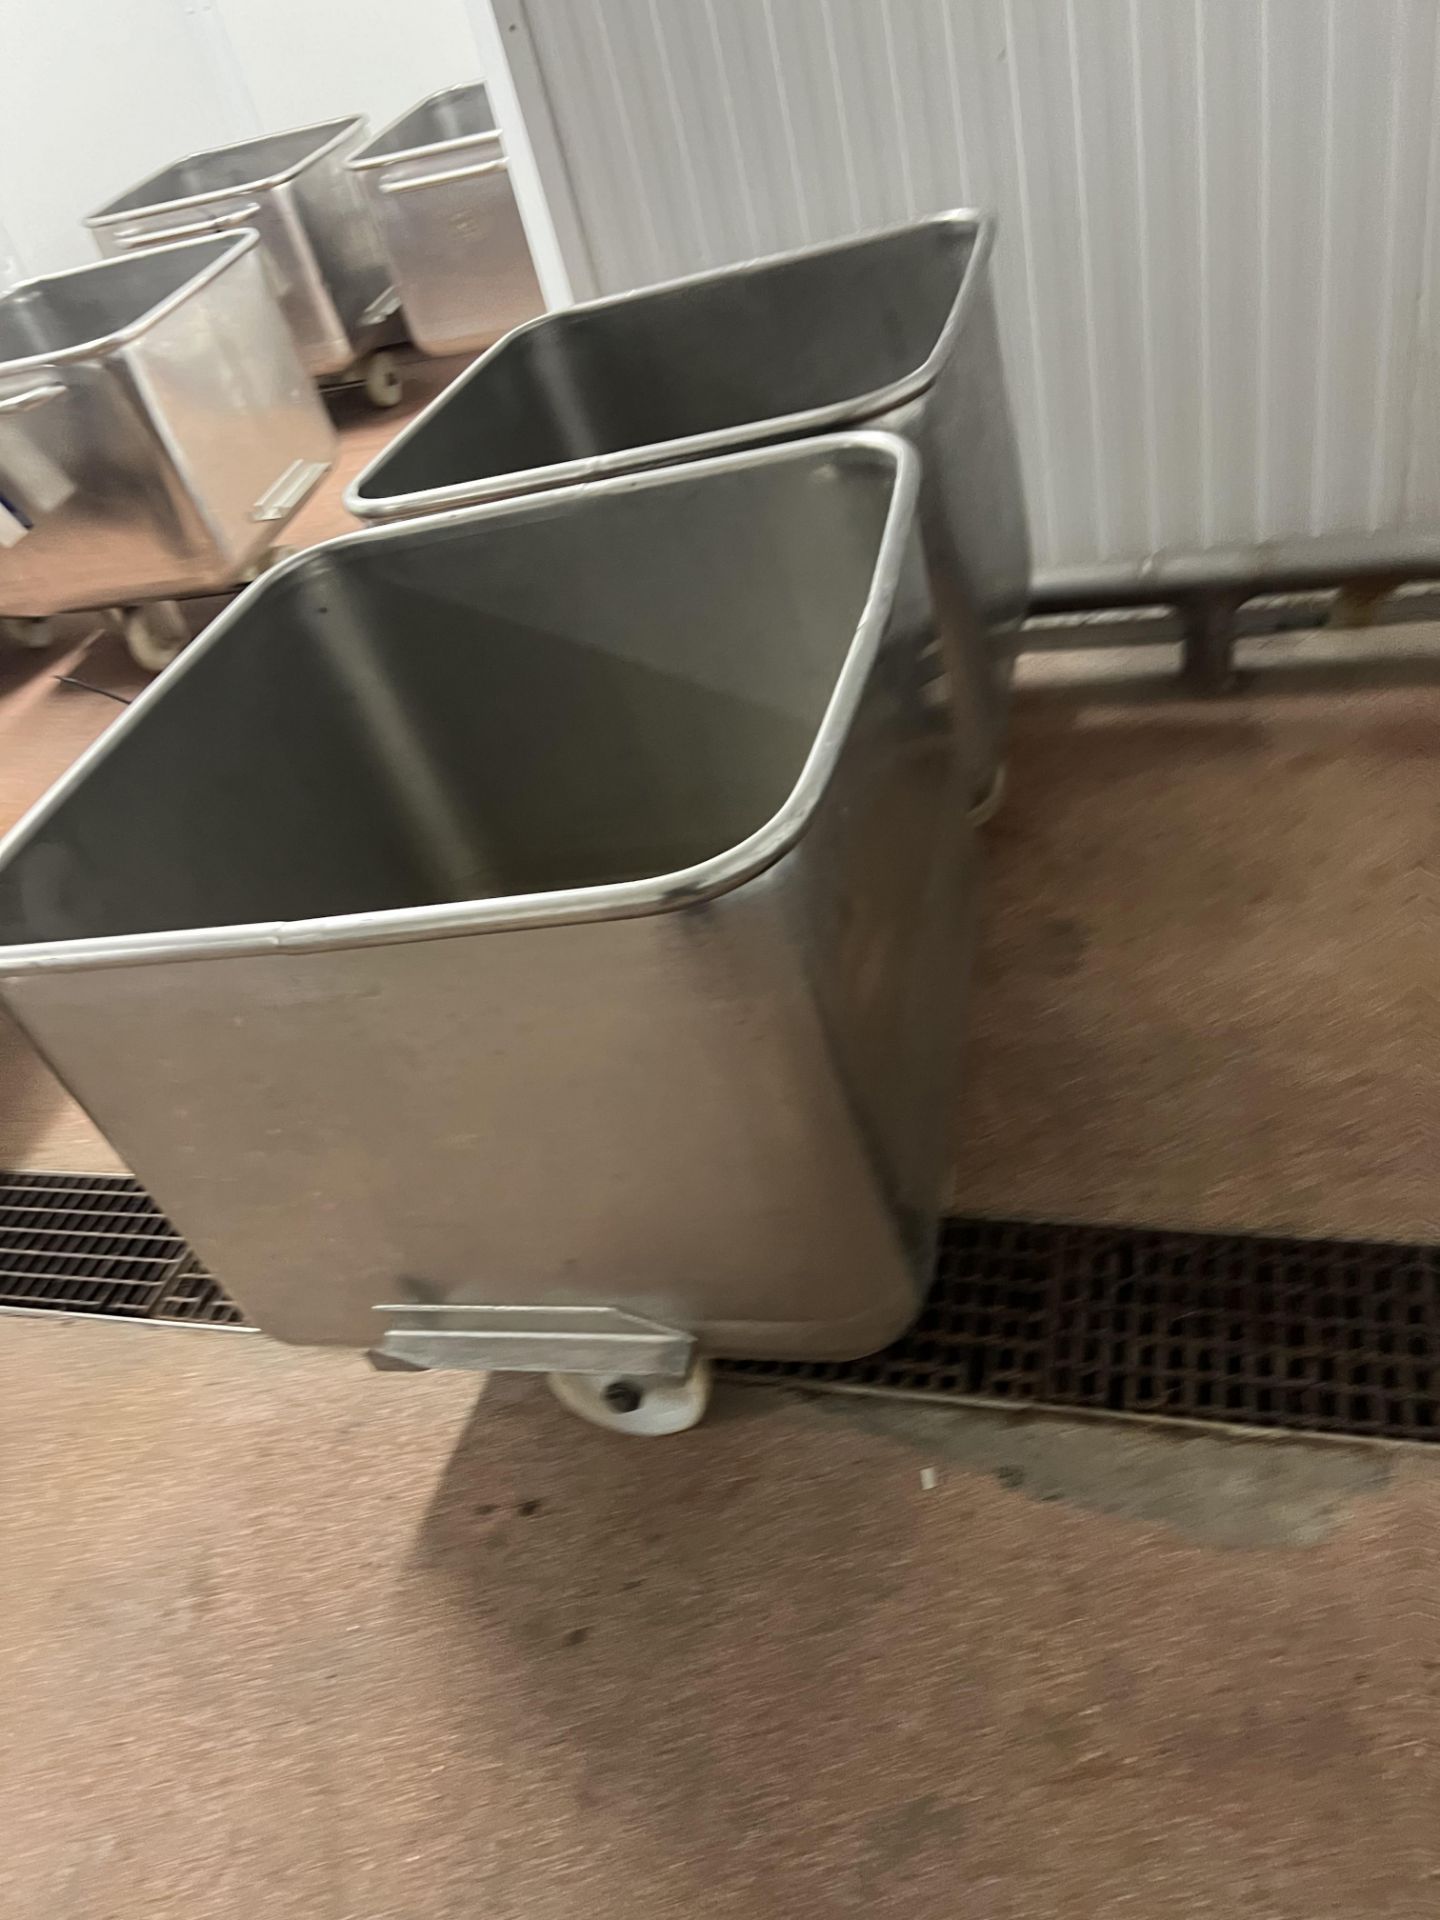 Two Tote Bins, lift out charge - £20 + VAT, lot located in Bury St Edmunds, Suffolk Please read - Image 3 of 3